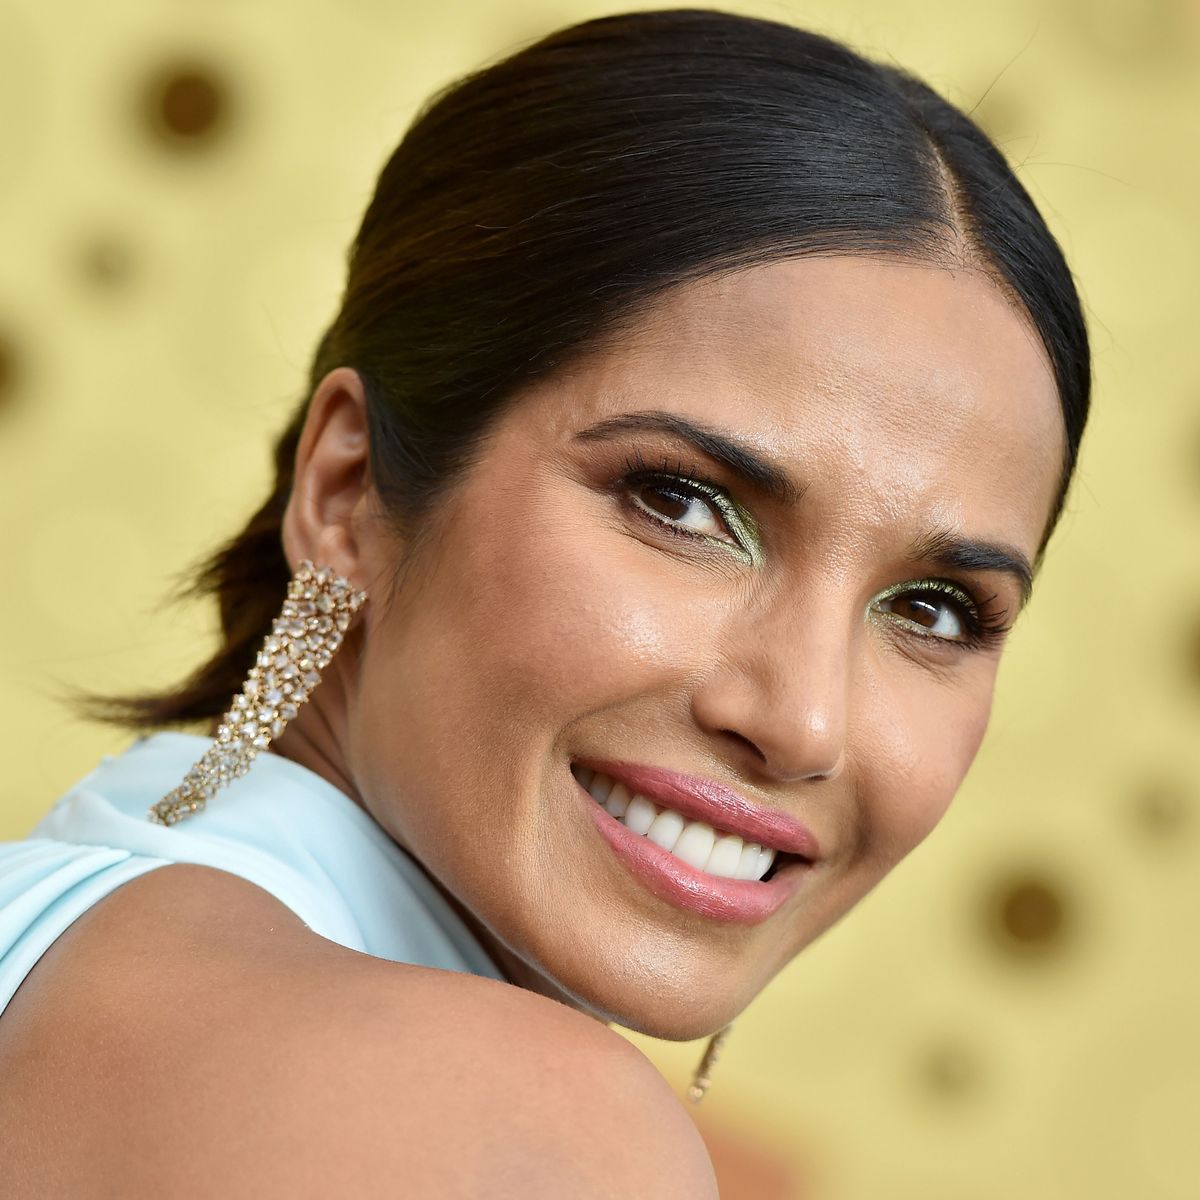 How Padma Lakshmi Got Ready, and Un-Ready, for the Emmys